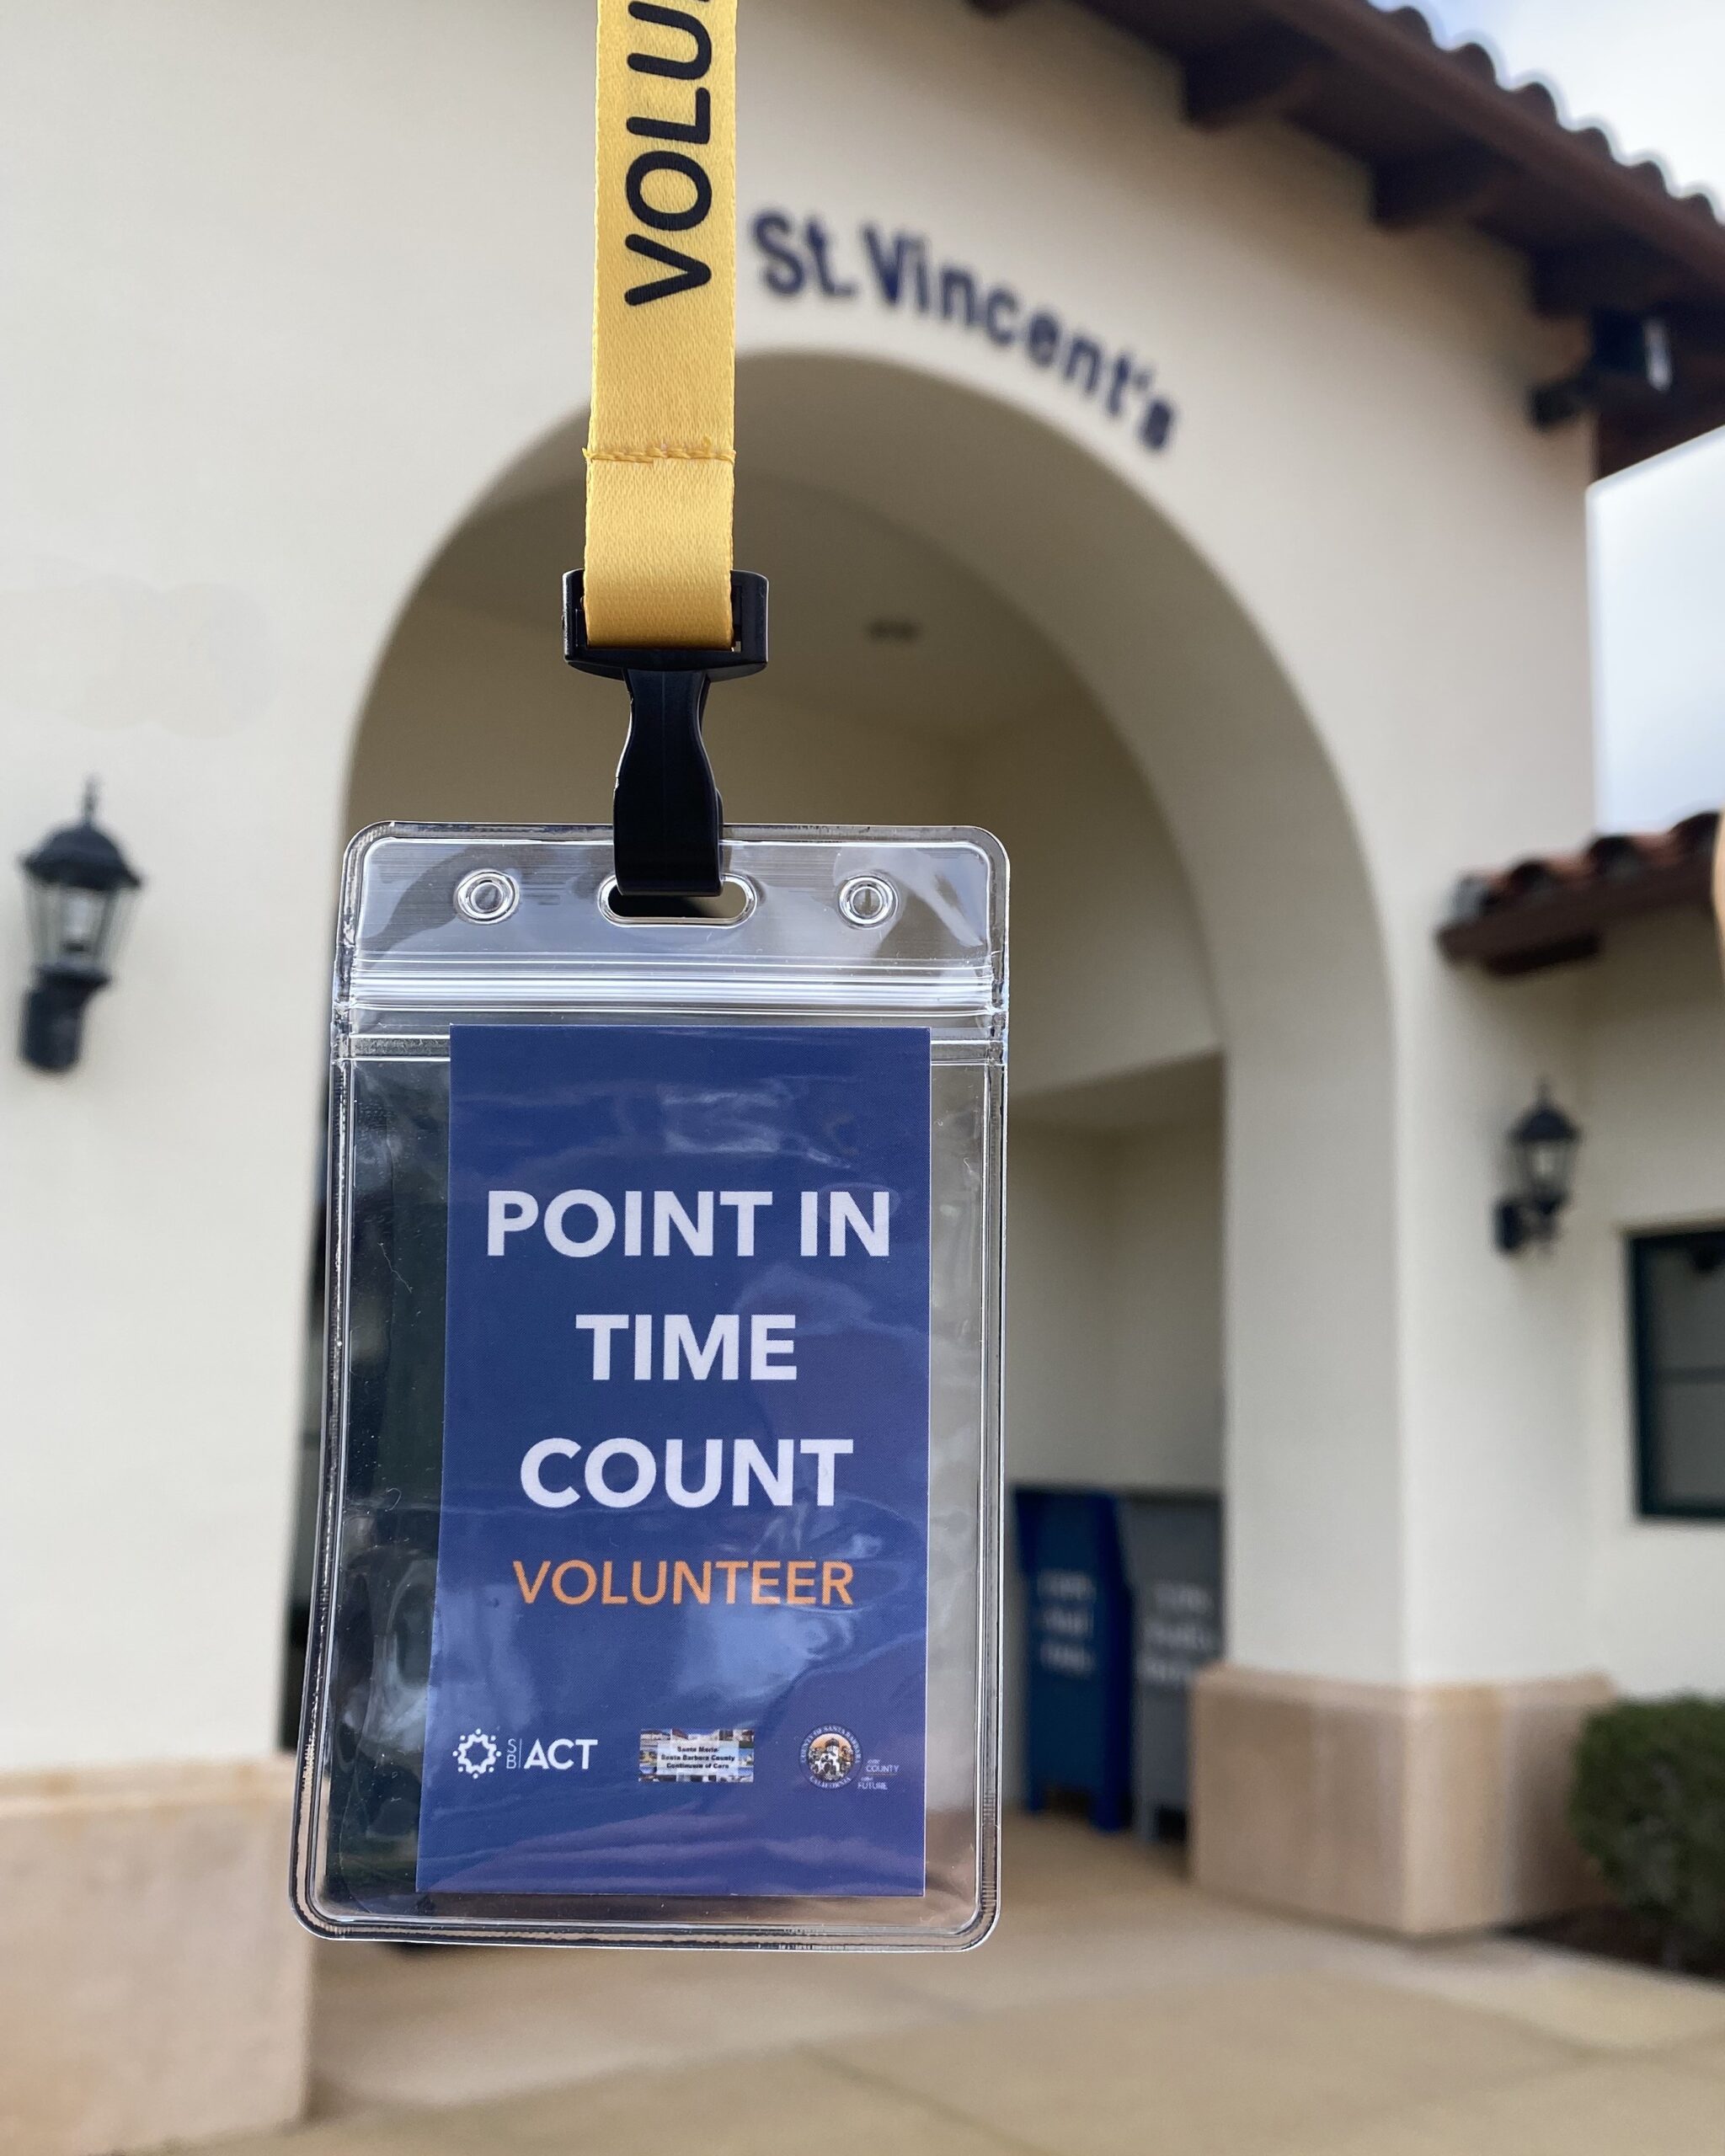 ST. VINCENT’S and THE FR. VIRGIL CORDANO CENTER JOIN SANTA BARBARA’S ANNUAL POINT-IN-TIME COUNT